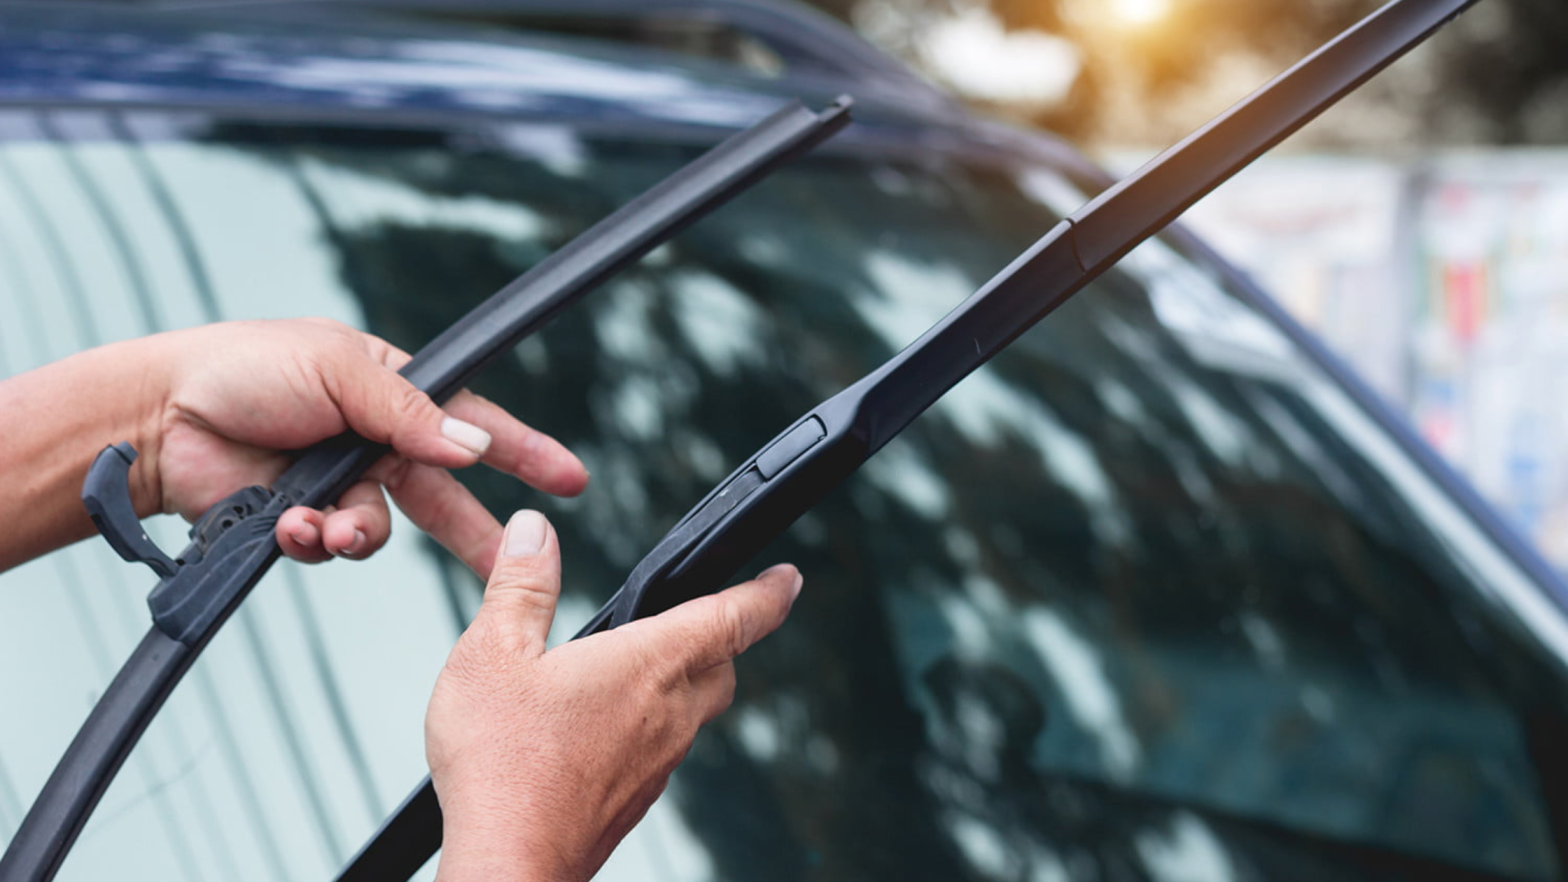 Winter-ready-How to Prep Your Wiper Blades for Cold Weather